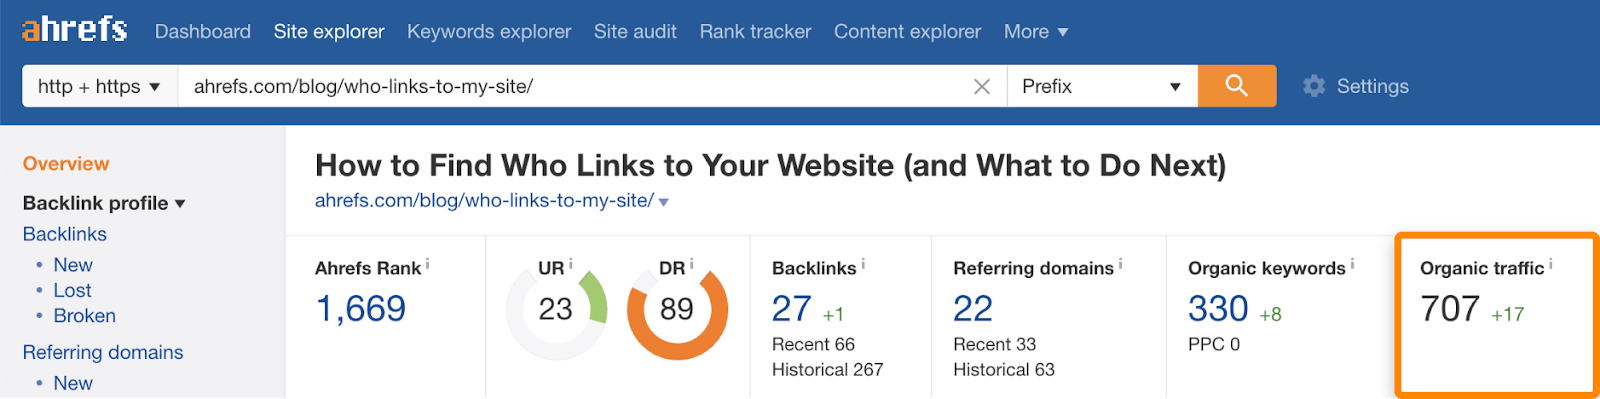 2 who links to my site traffic